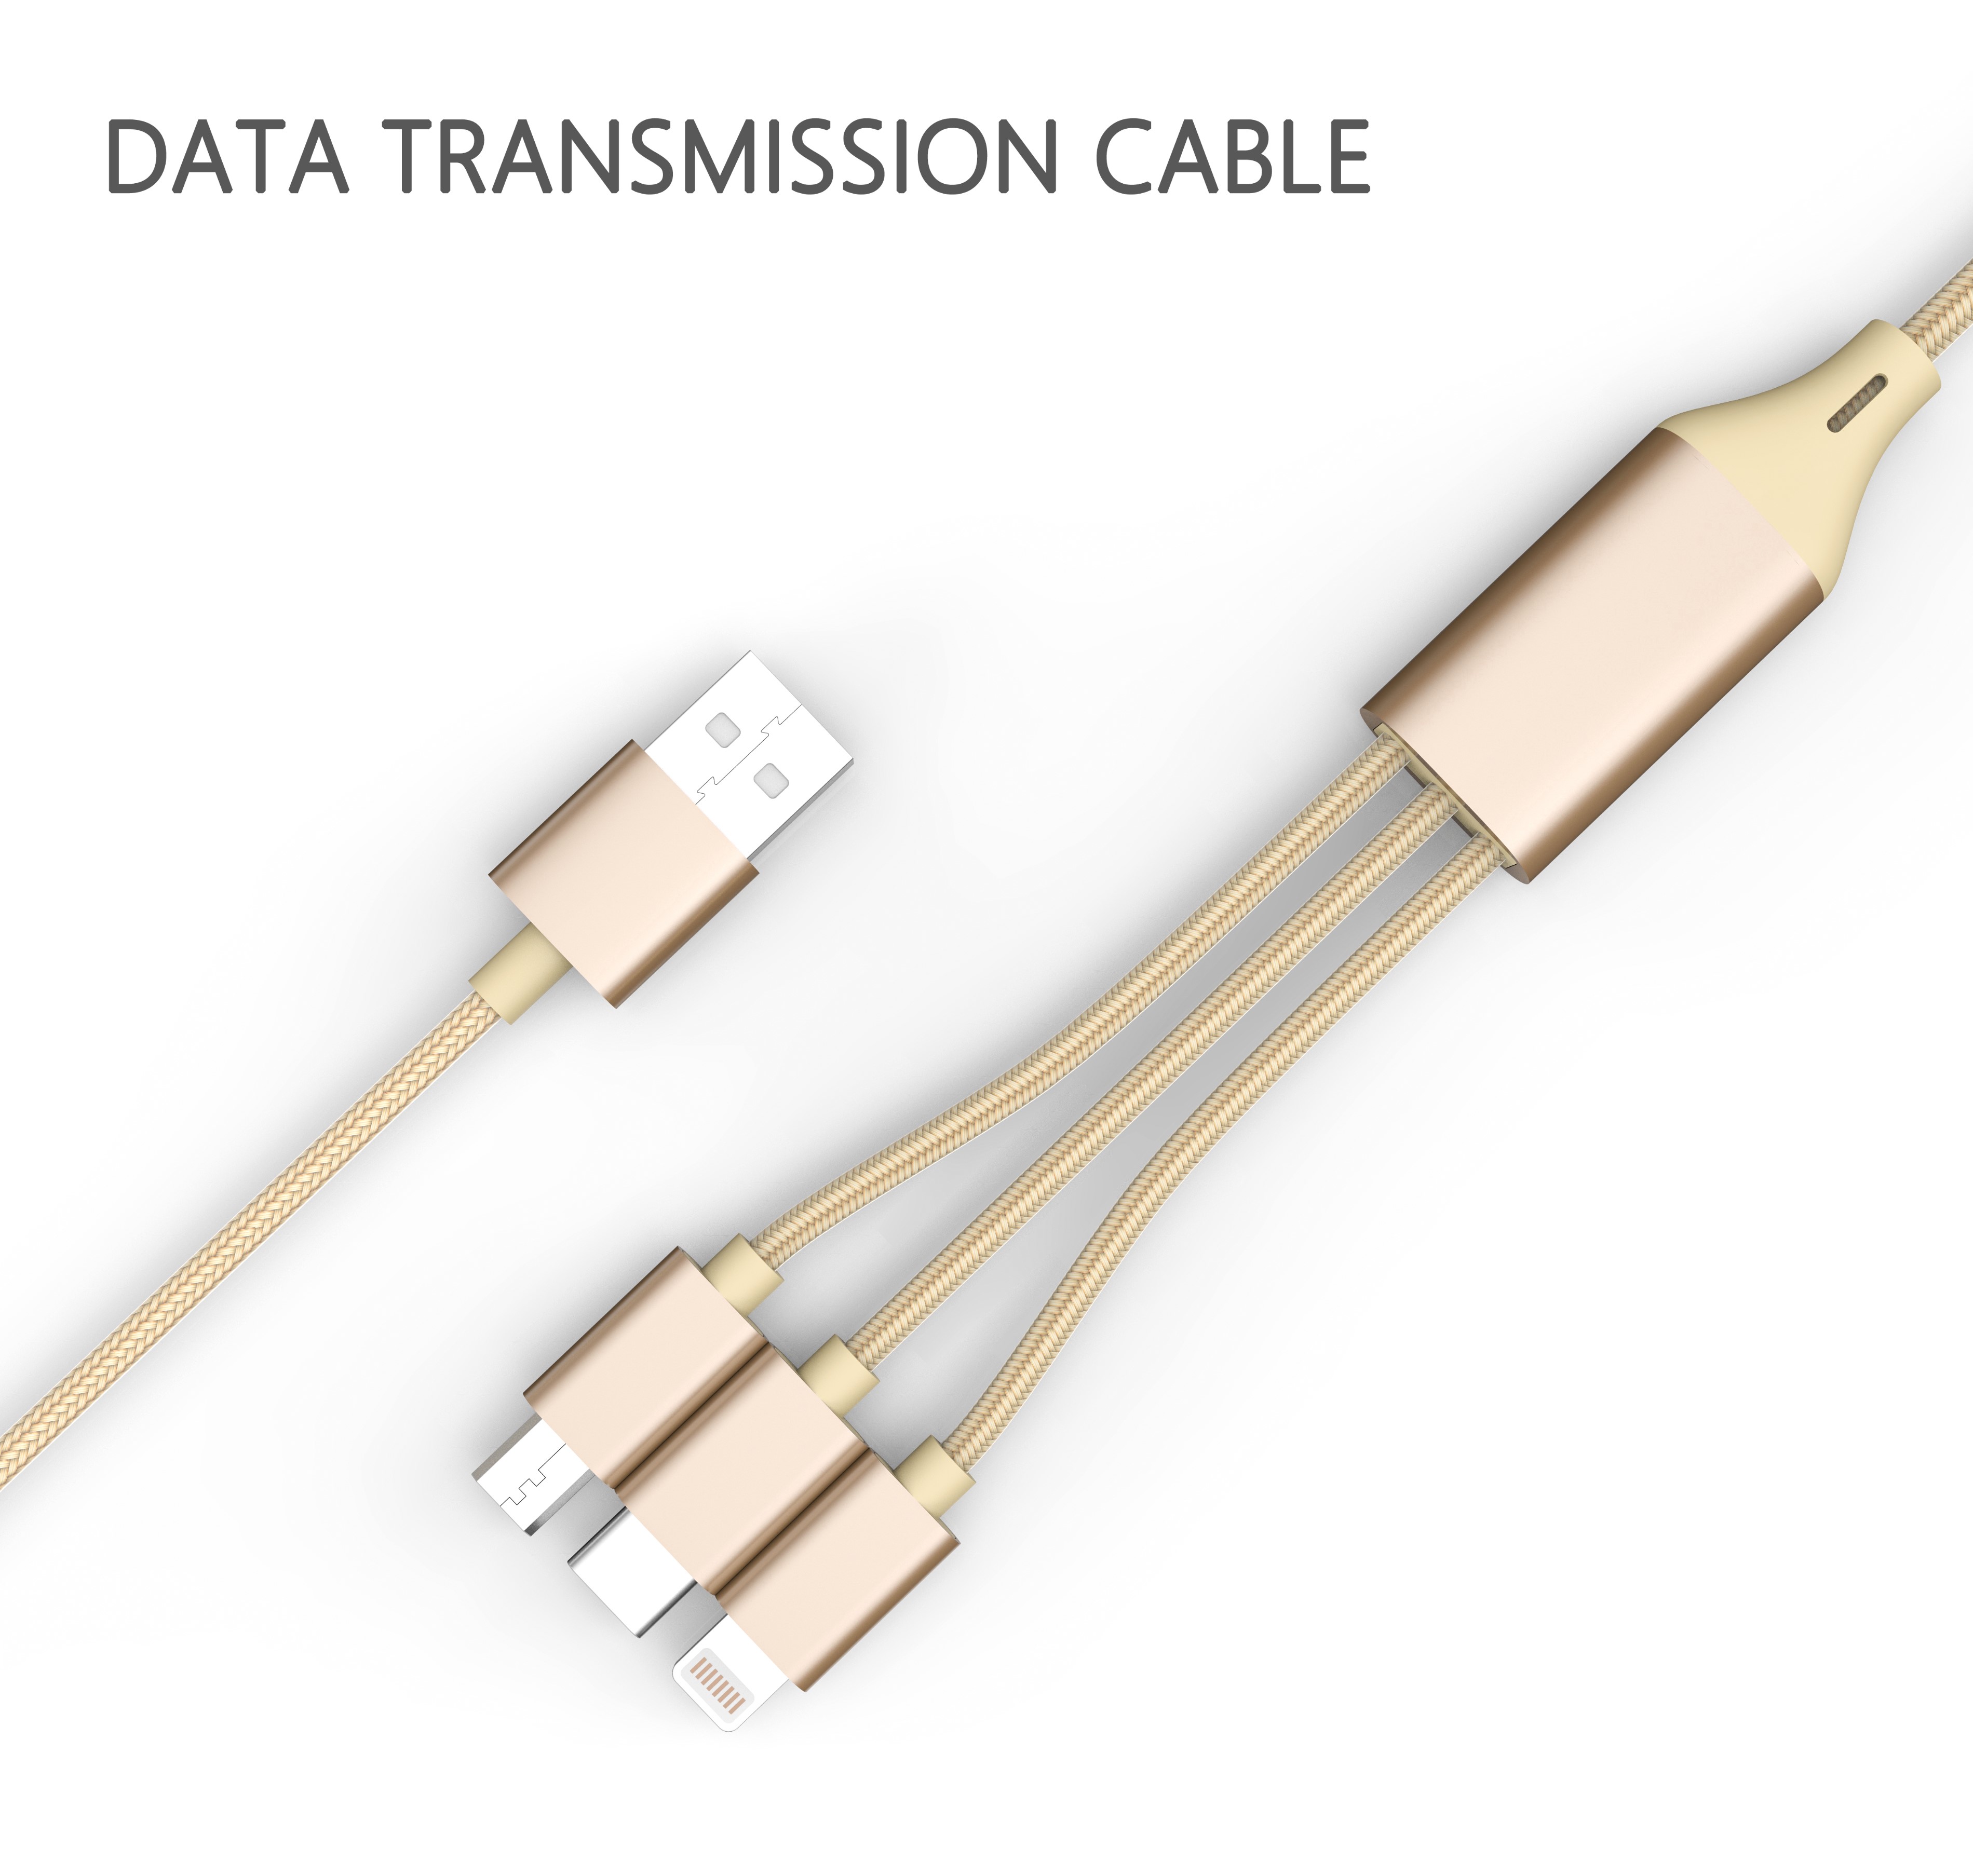 3 in 1 with data transmission cables